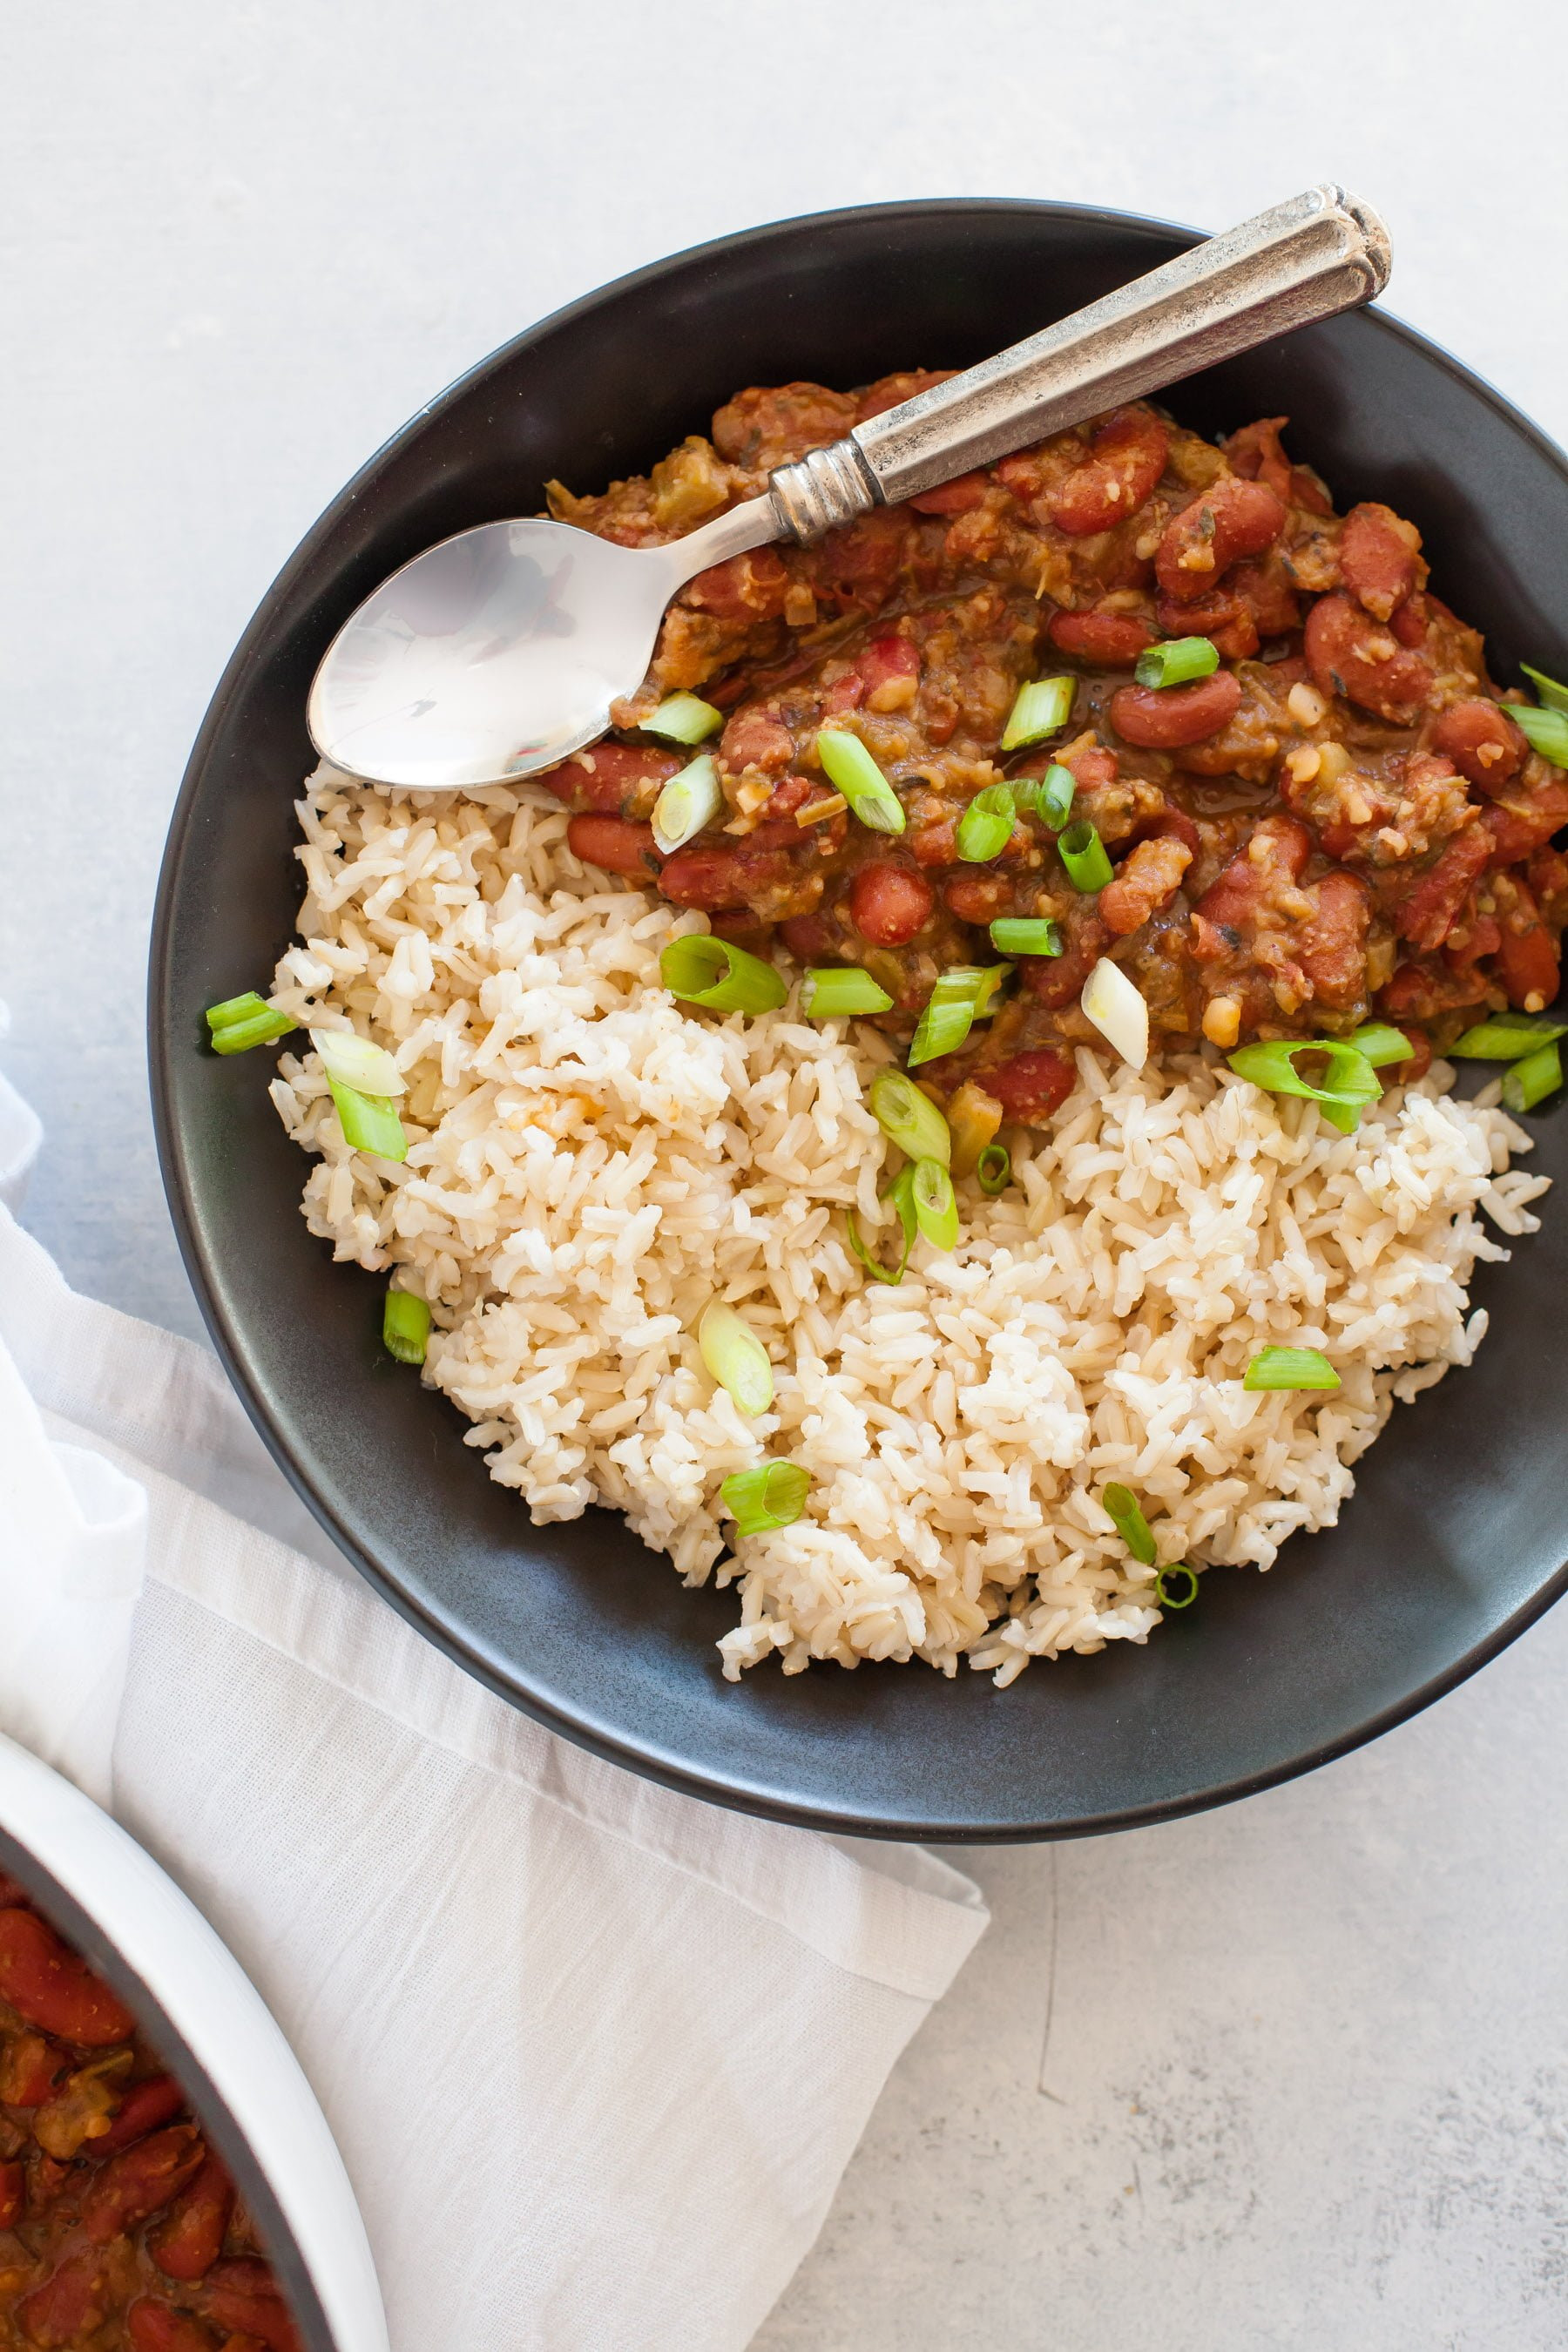 Red Beans And Rice Recipe Vegetarian
 Vegan Red Beans and Rice Wholefully